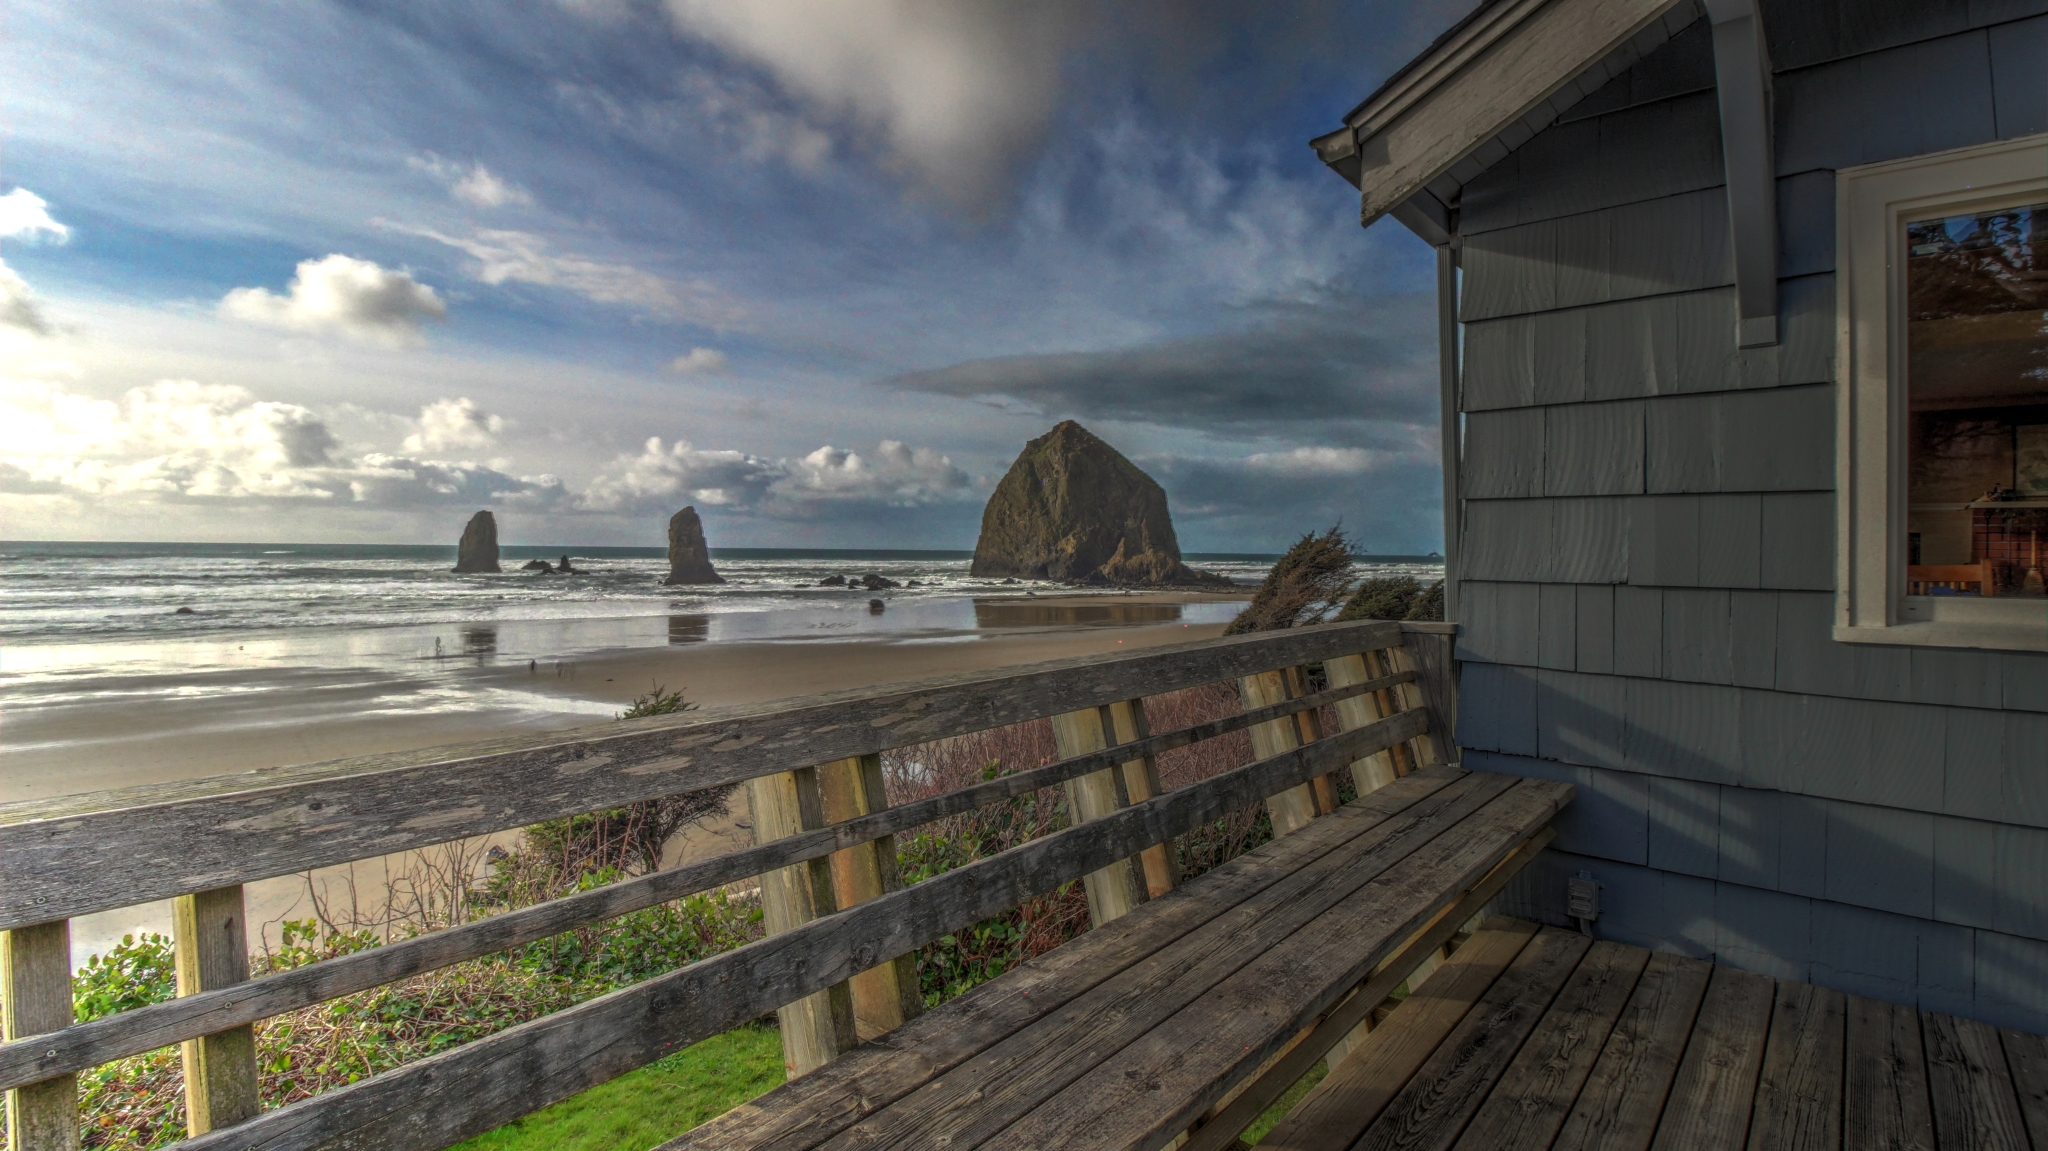 Neilson’s View of Haystack Rock and Ocean From Deck